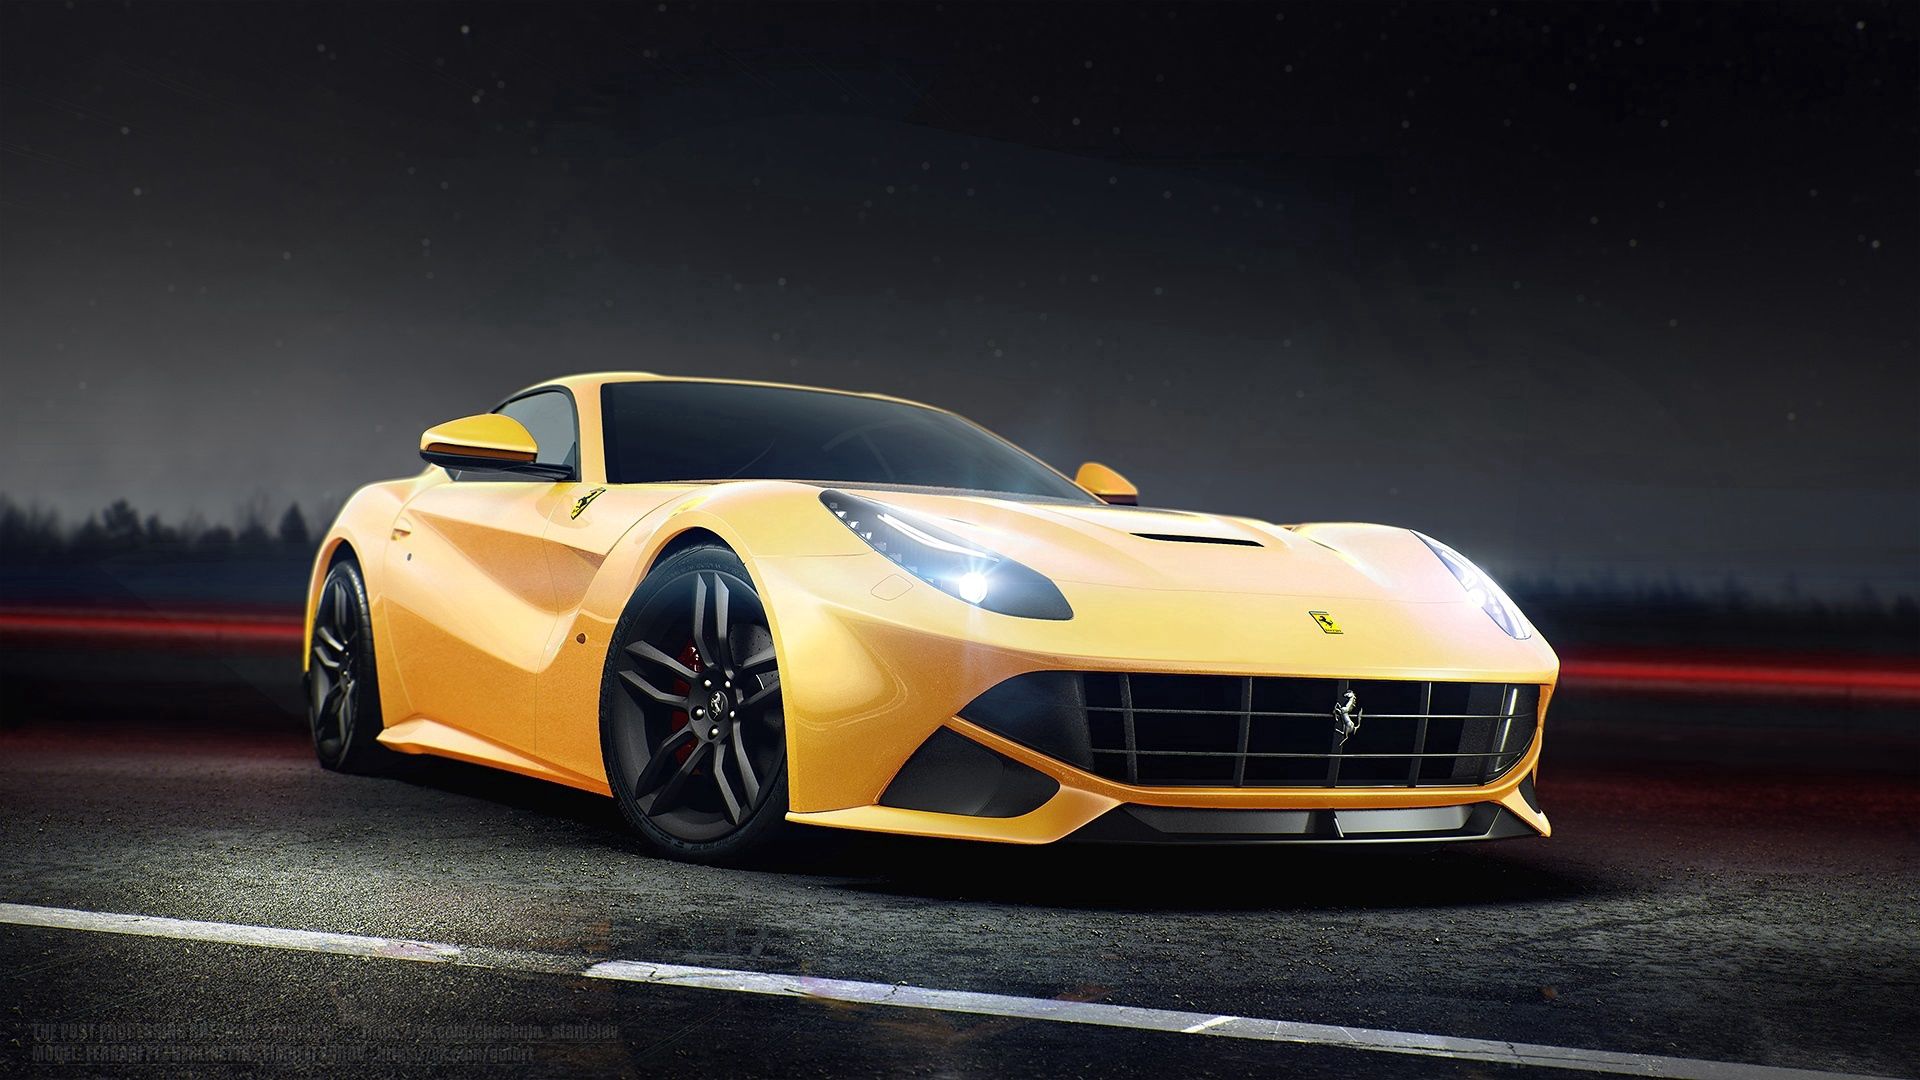 79909 free download Yellow wallpapers for phone, f12, ferrari, side view, cars Yellow images and screensavers for mobile